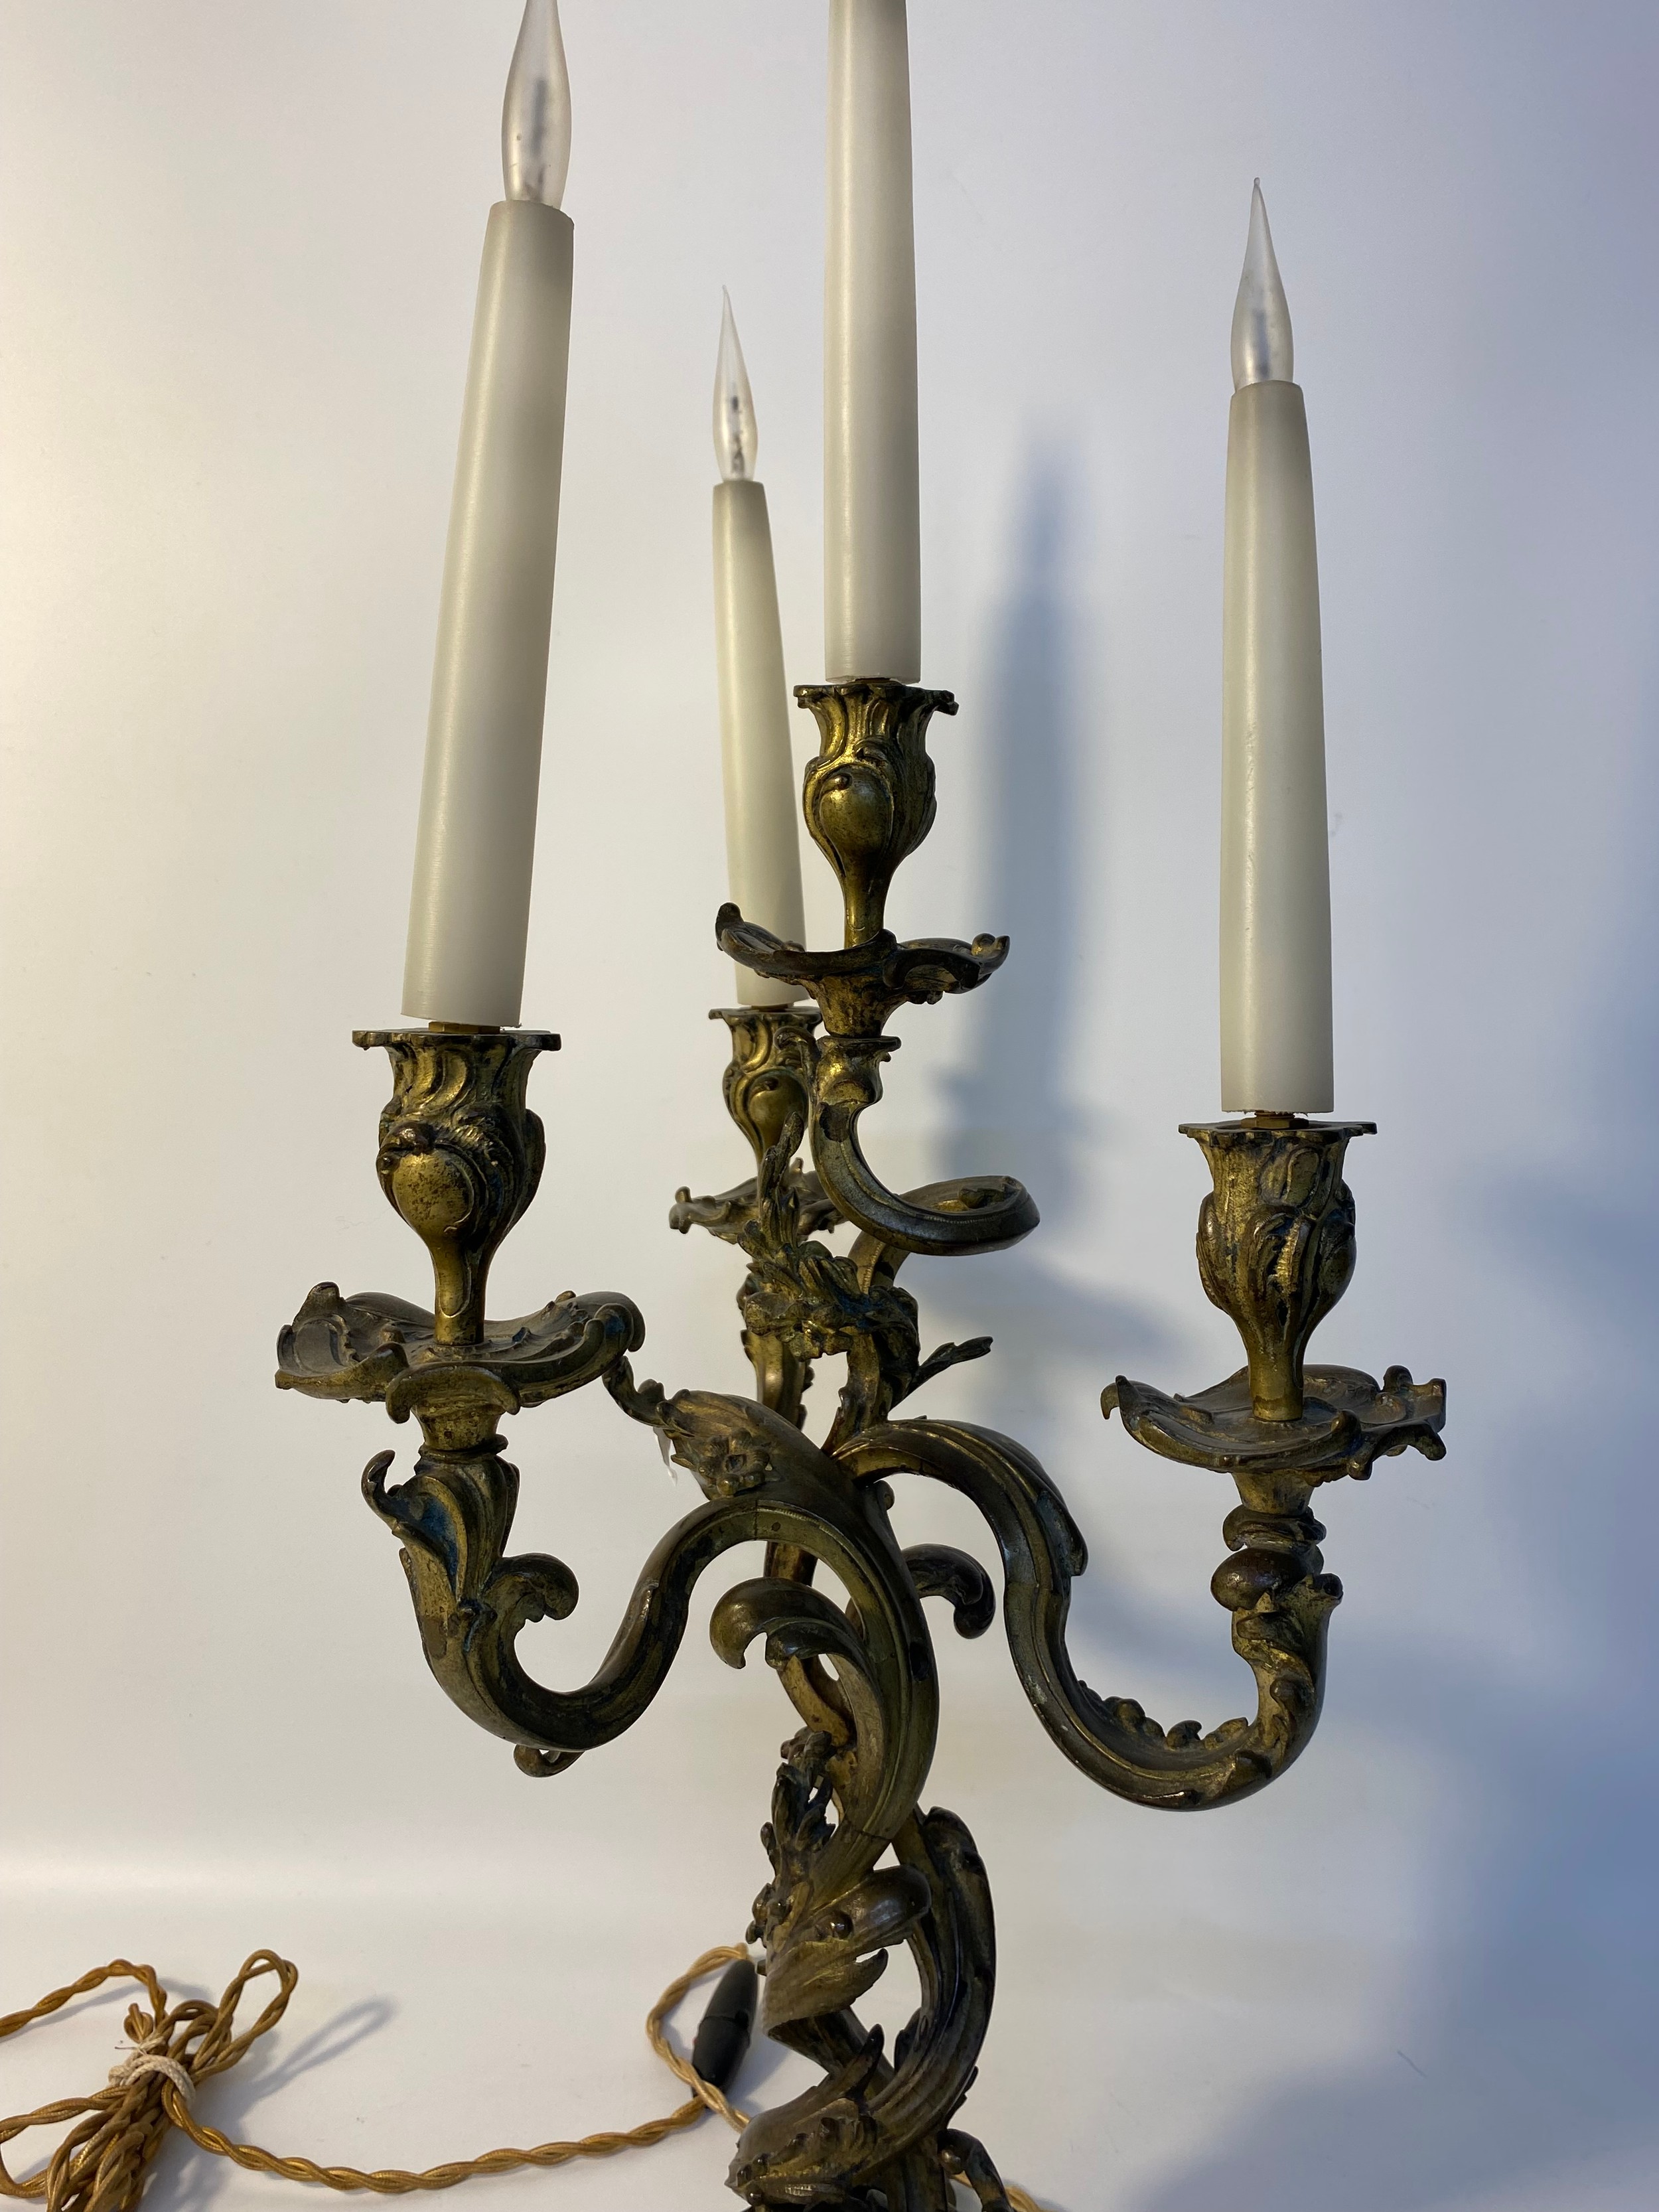 19th century 4 branch candelabra [converted to electric] [47.5cm] - Image 4 of 4